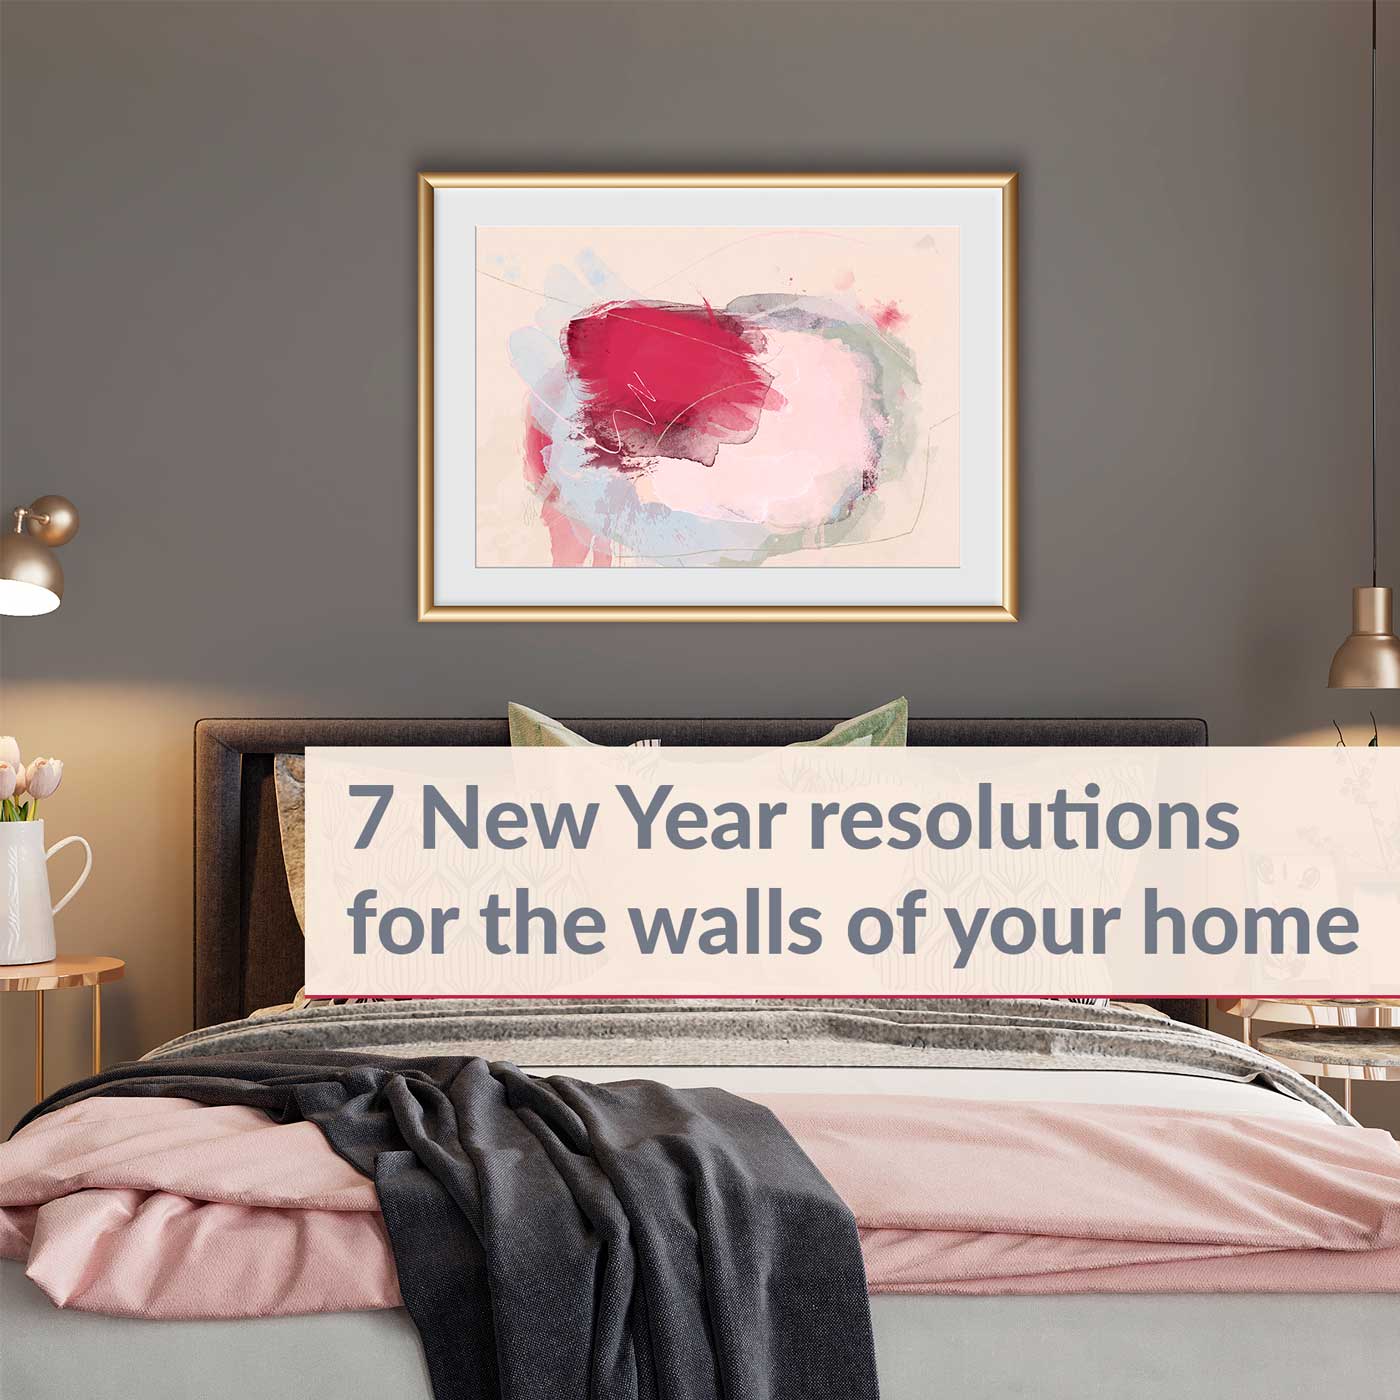 7 New Year resolutions for the walls of your home